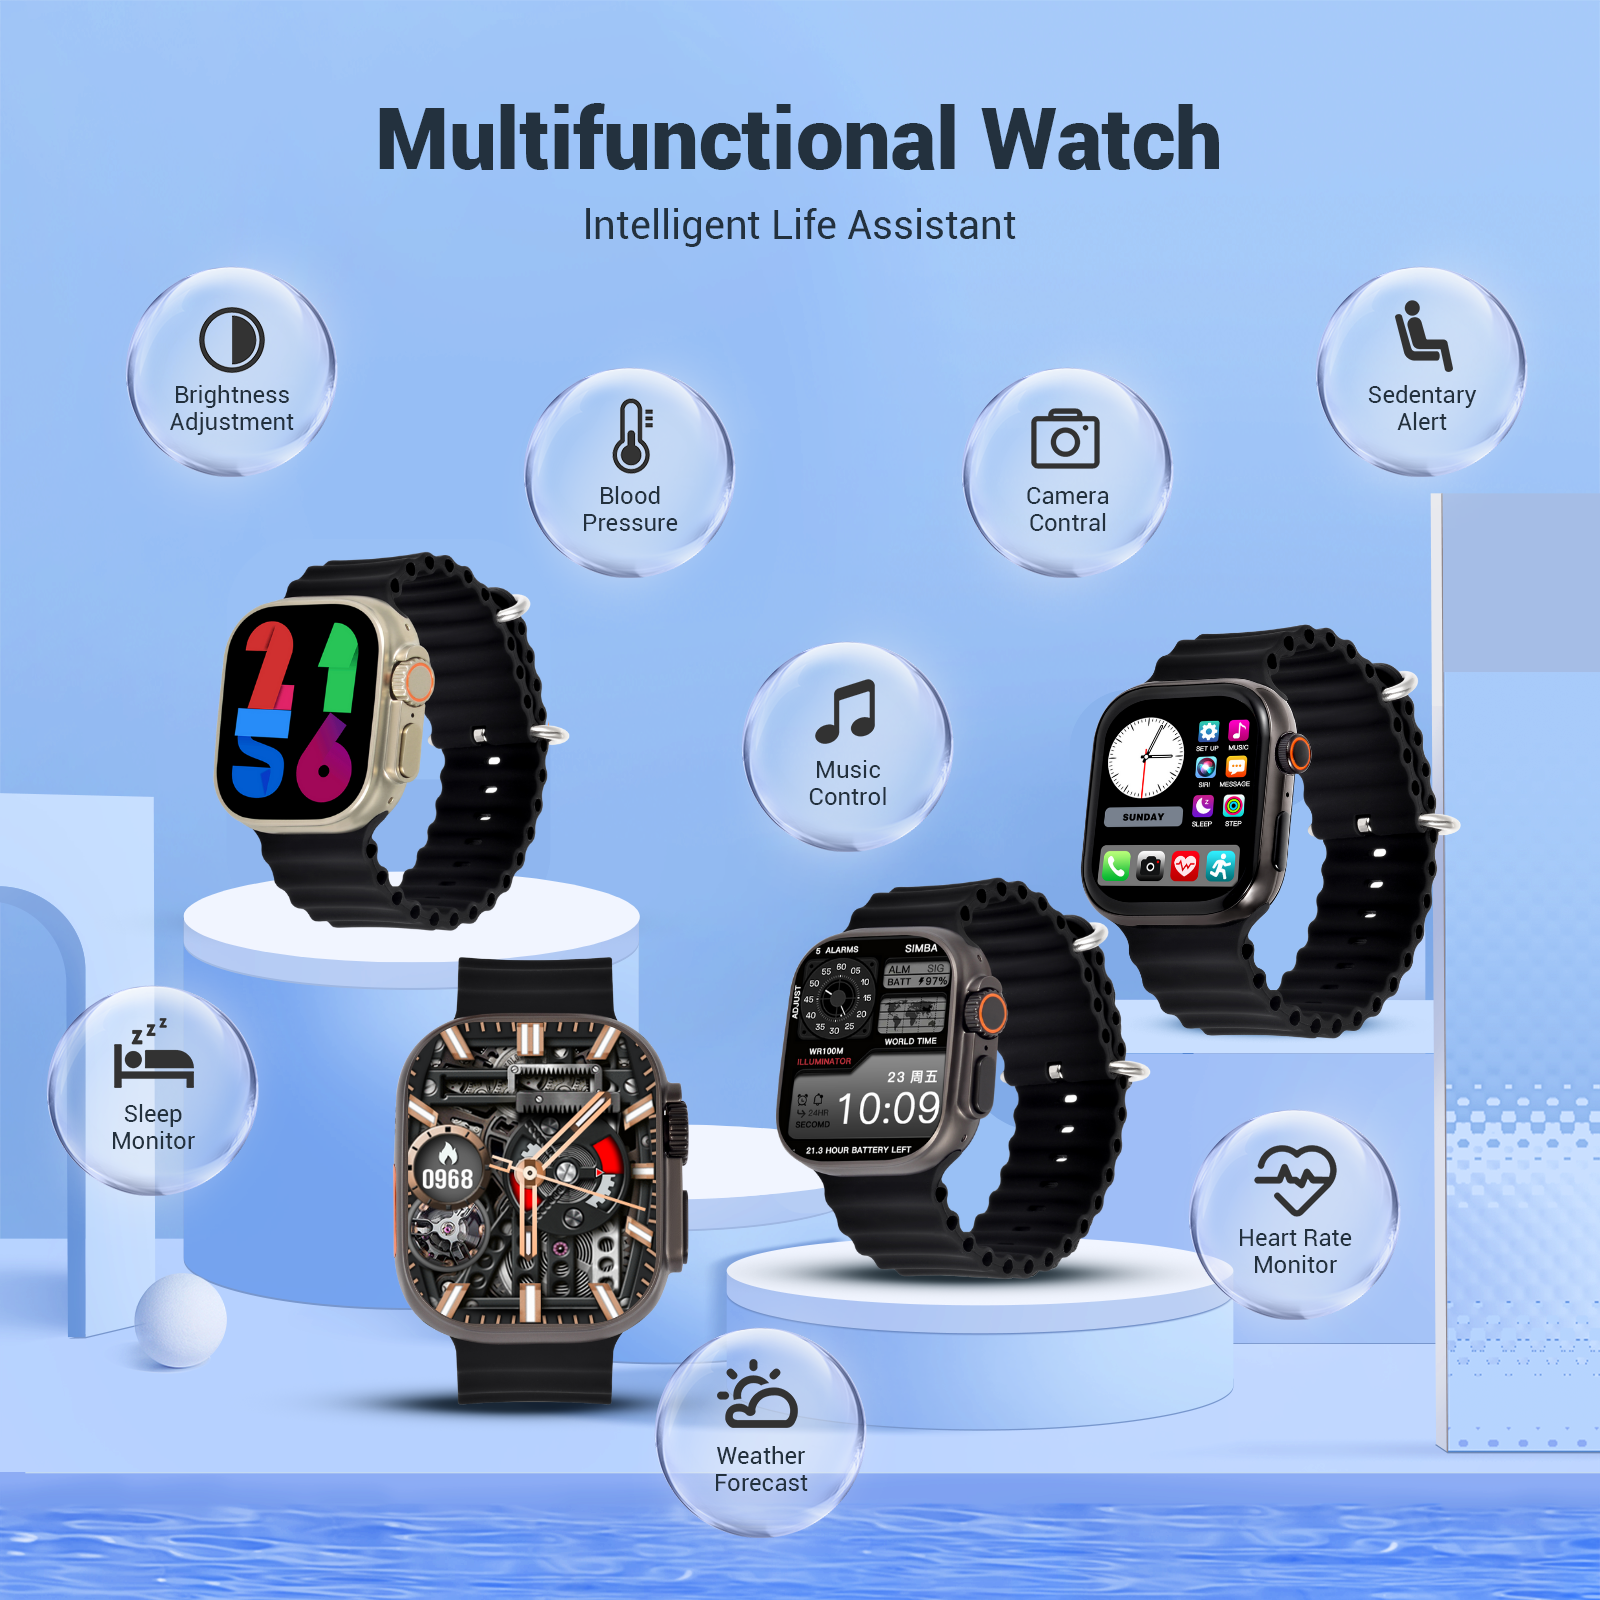 New Smartwatch Allows for Bluetooth Calling on the Go